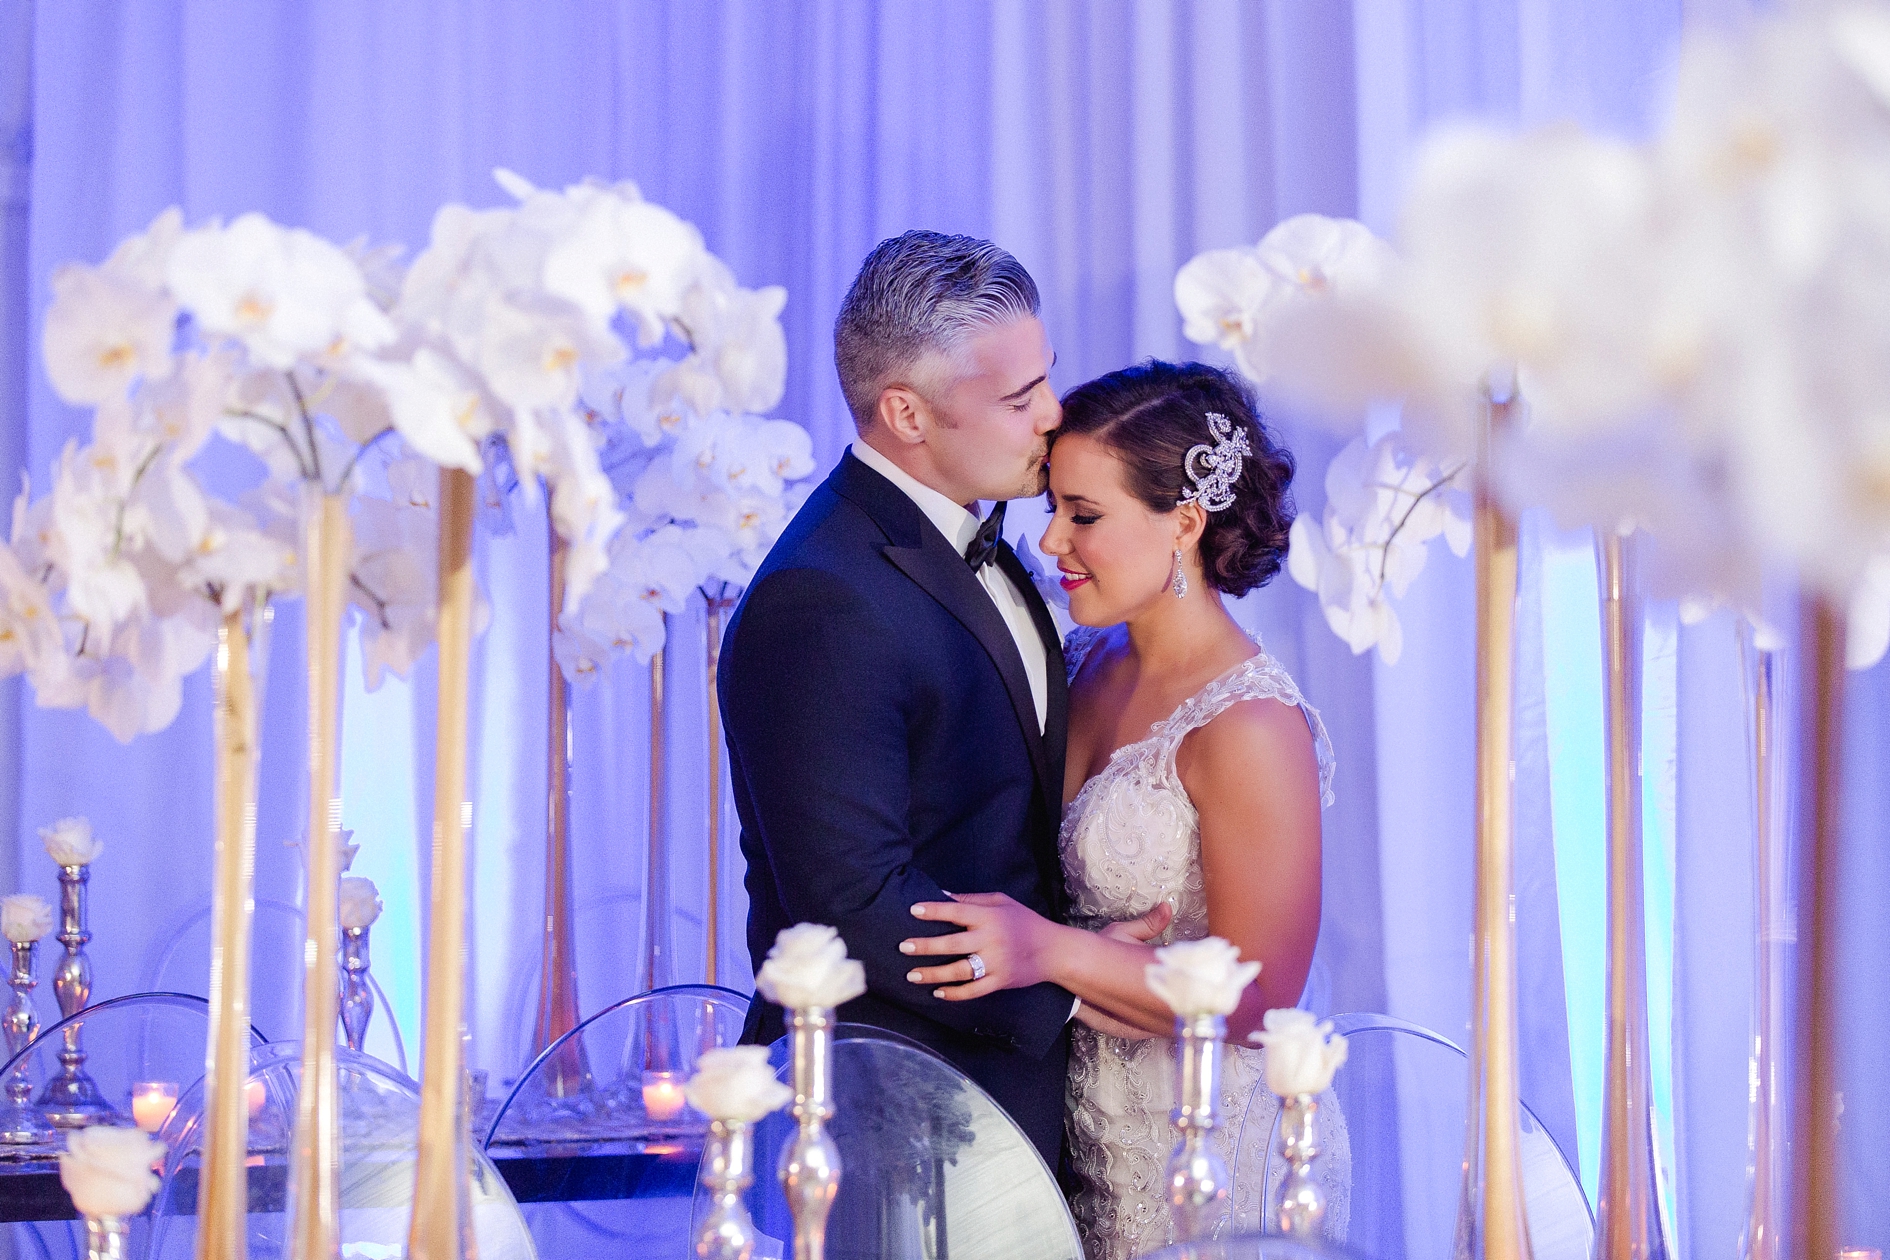 Tampa Wedding | © Ailyn La Torre Photography 2015